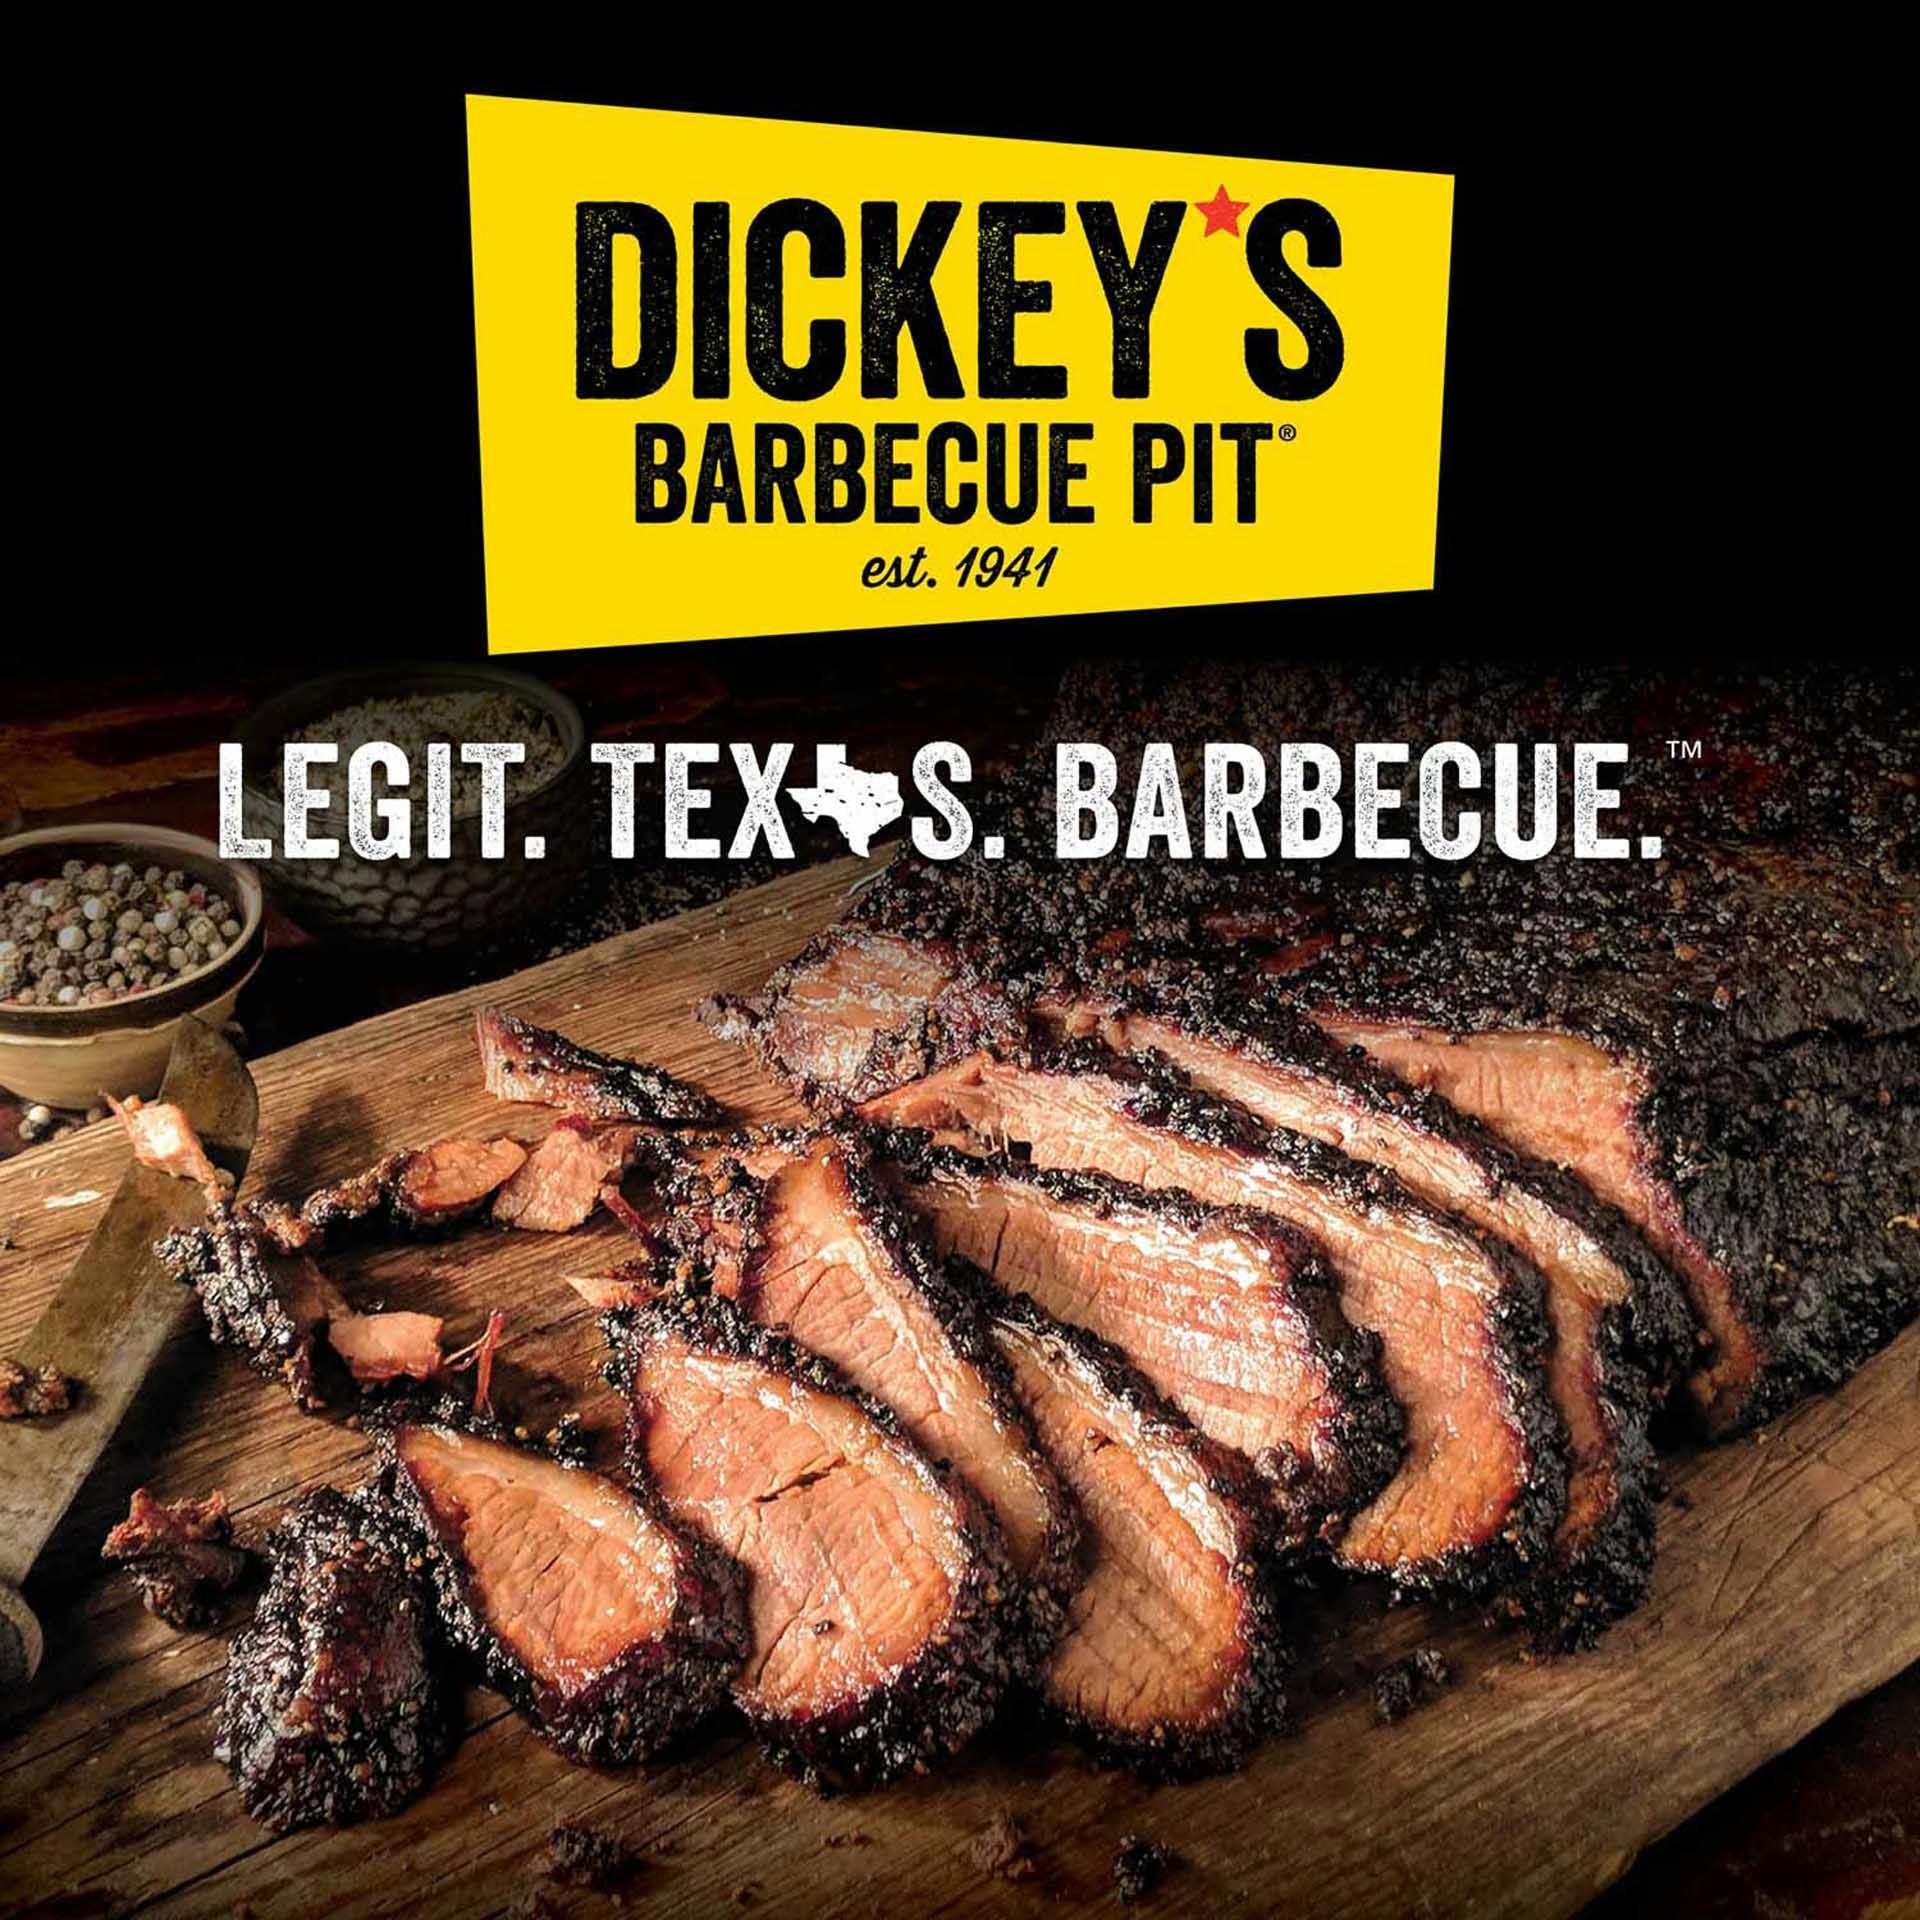 Daily Meal: America's 25 Best Barbecue Chains